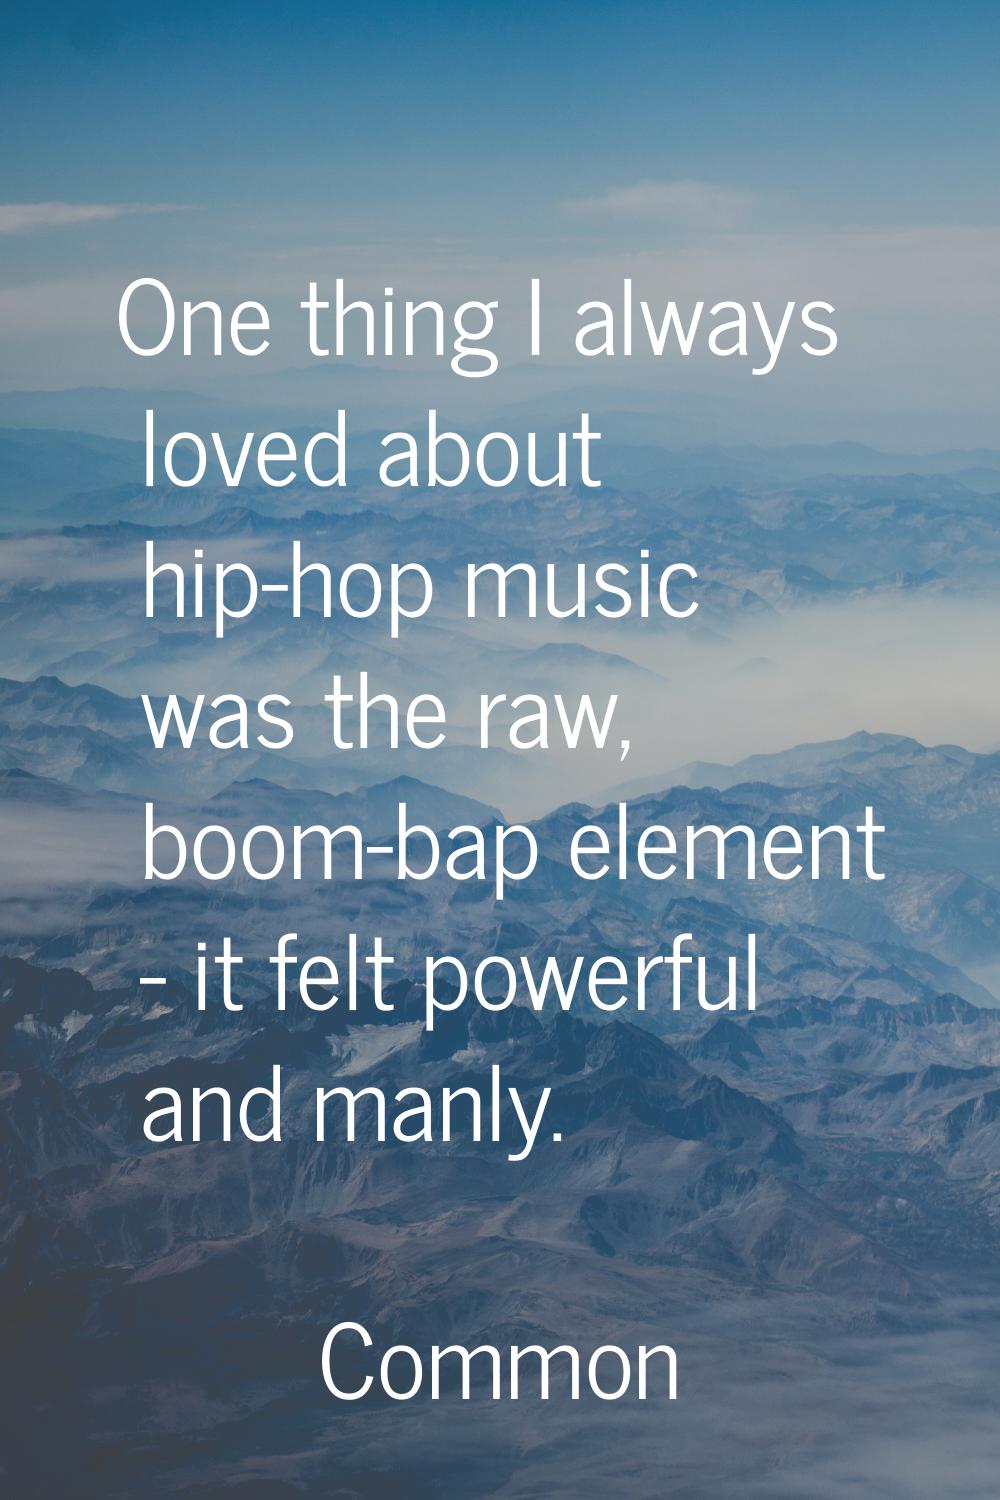 One thing I always loved about hip-hop music was the raw, boom-bap element - it felt powerful and m